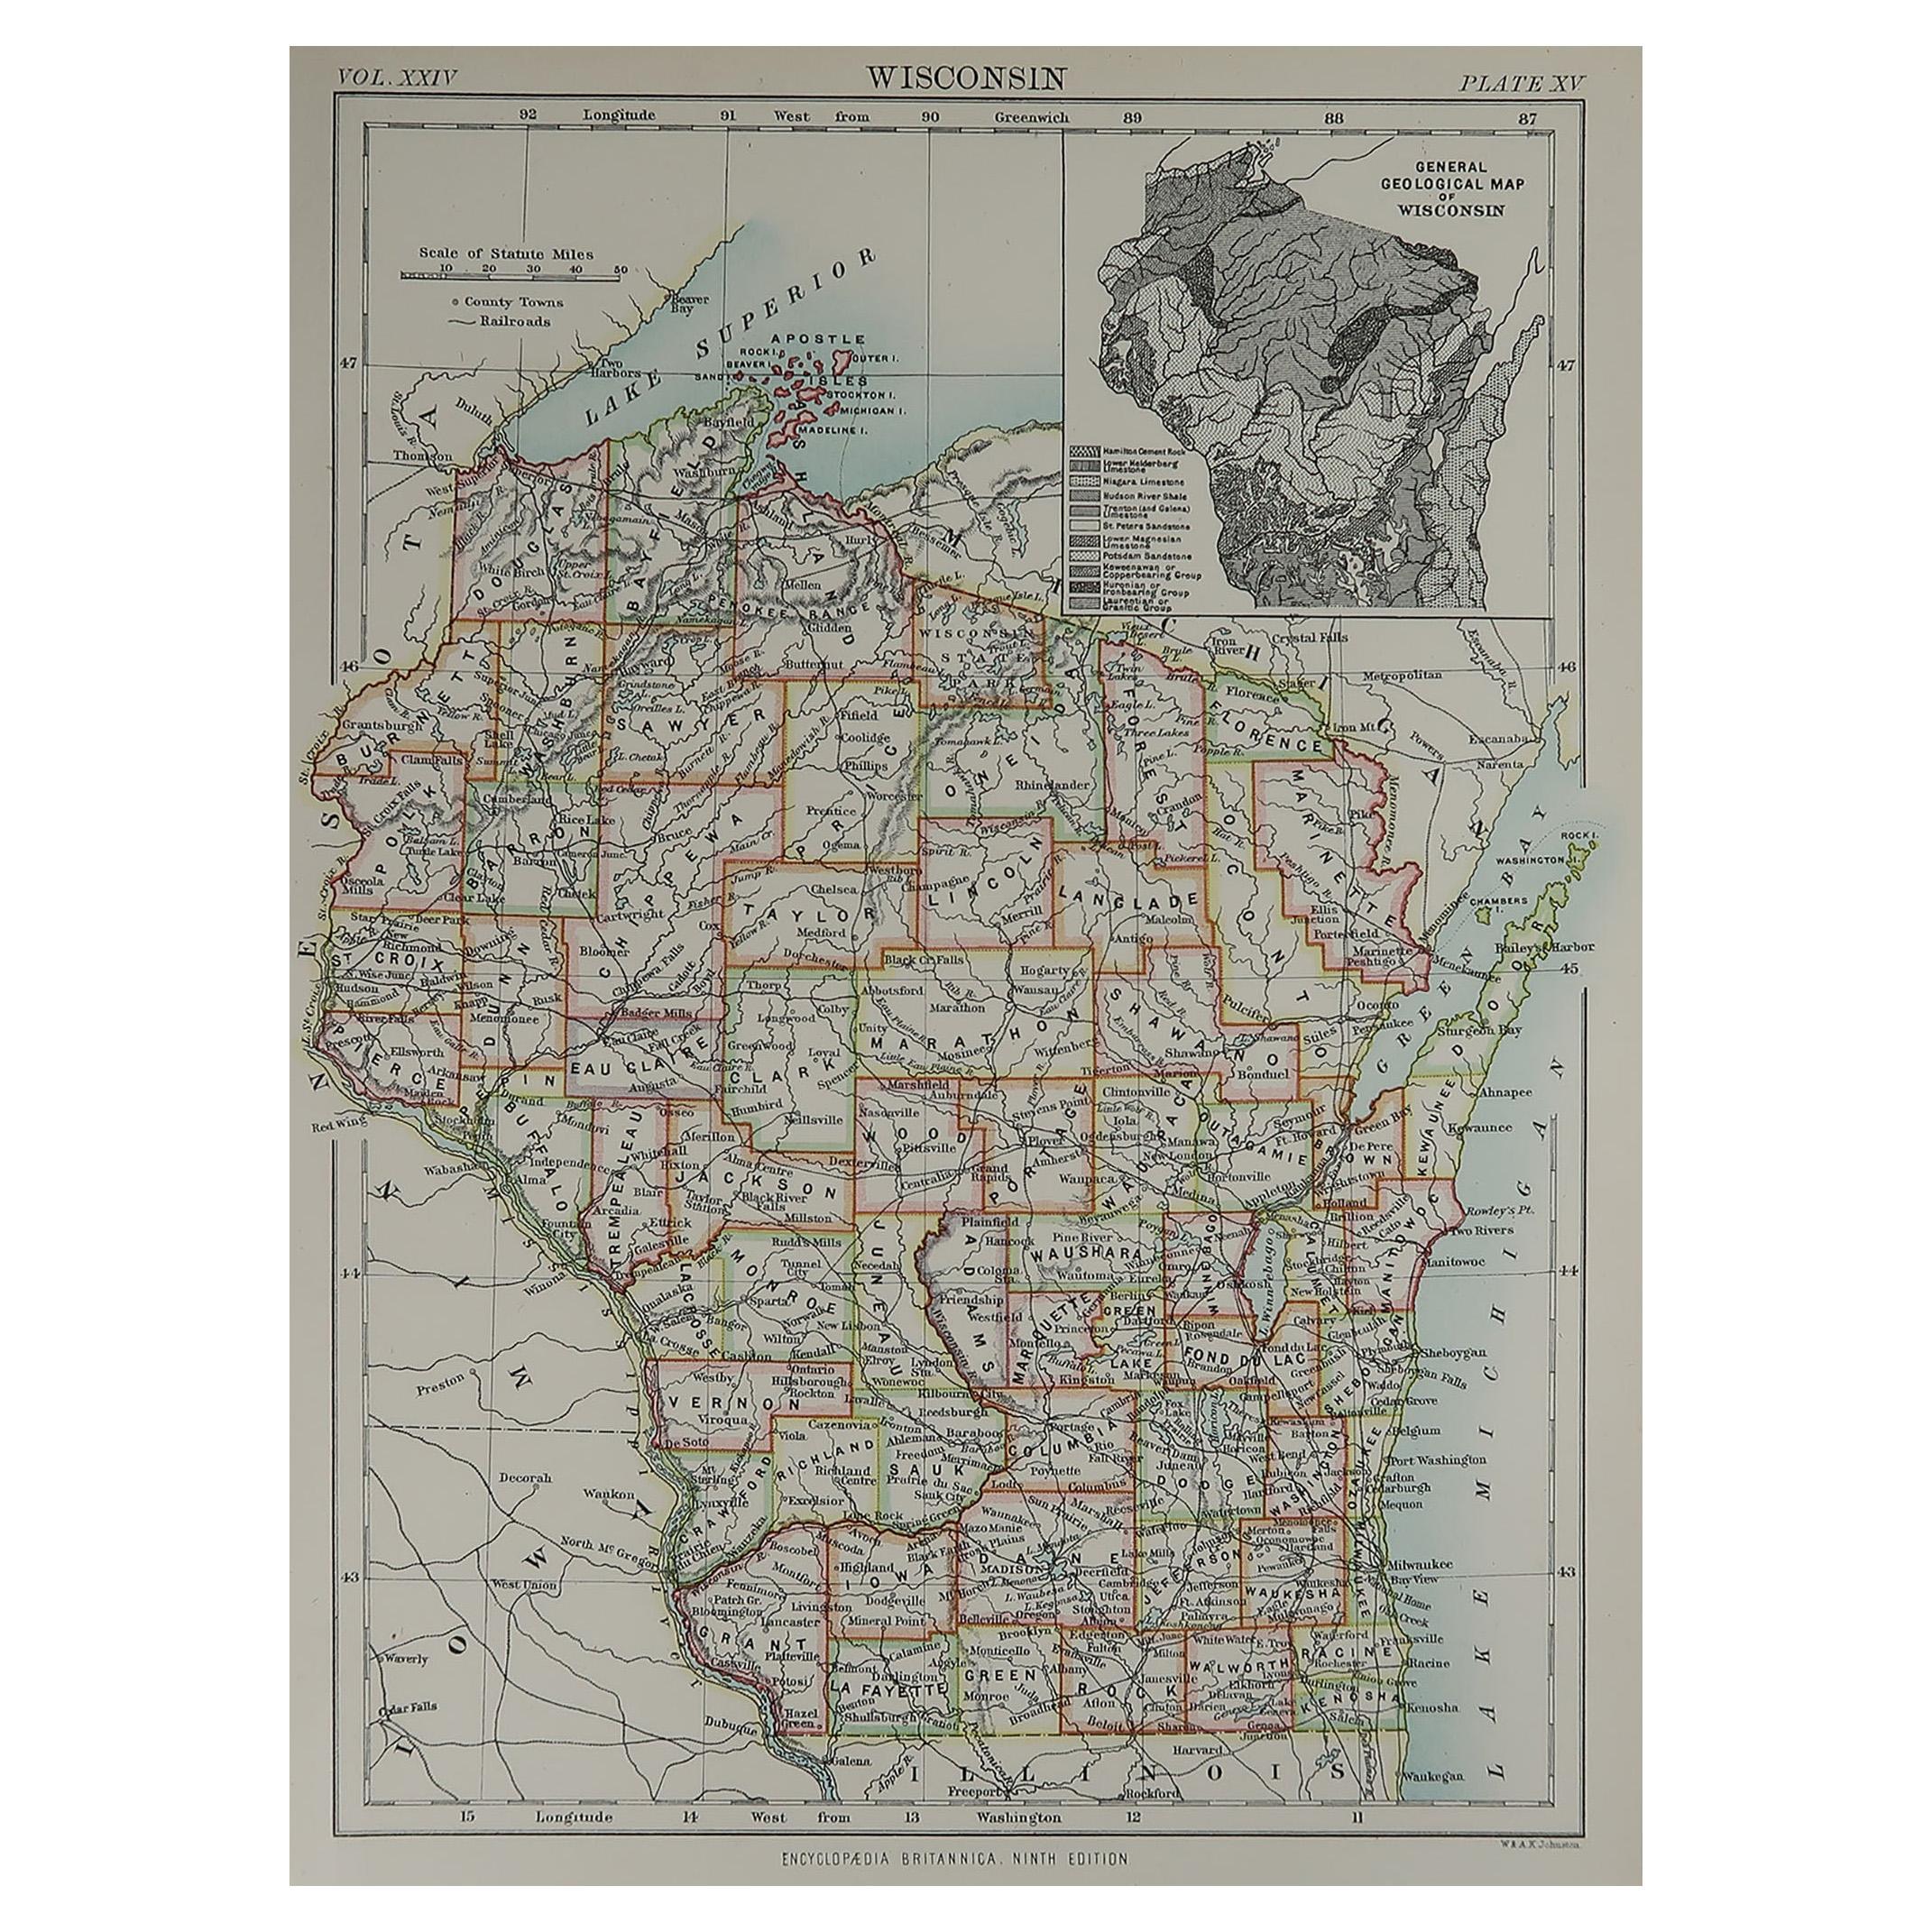 Original Antique Map of The American State of Wisconsin, 1889